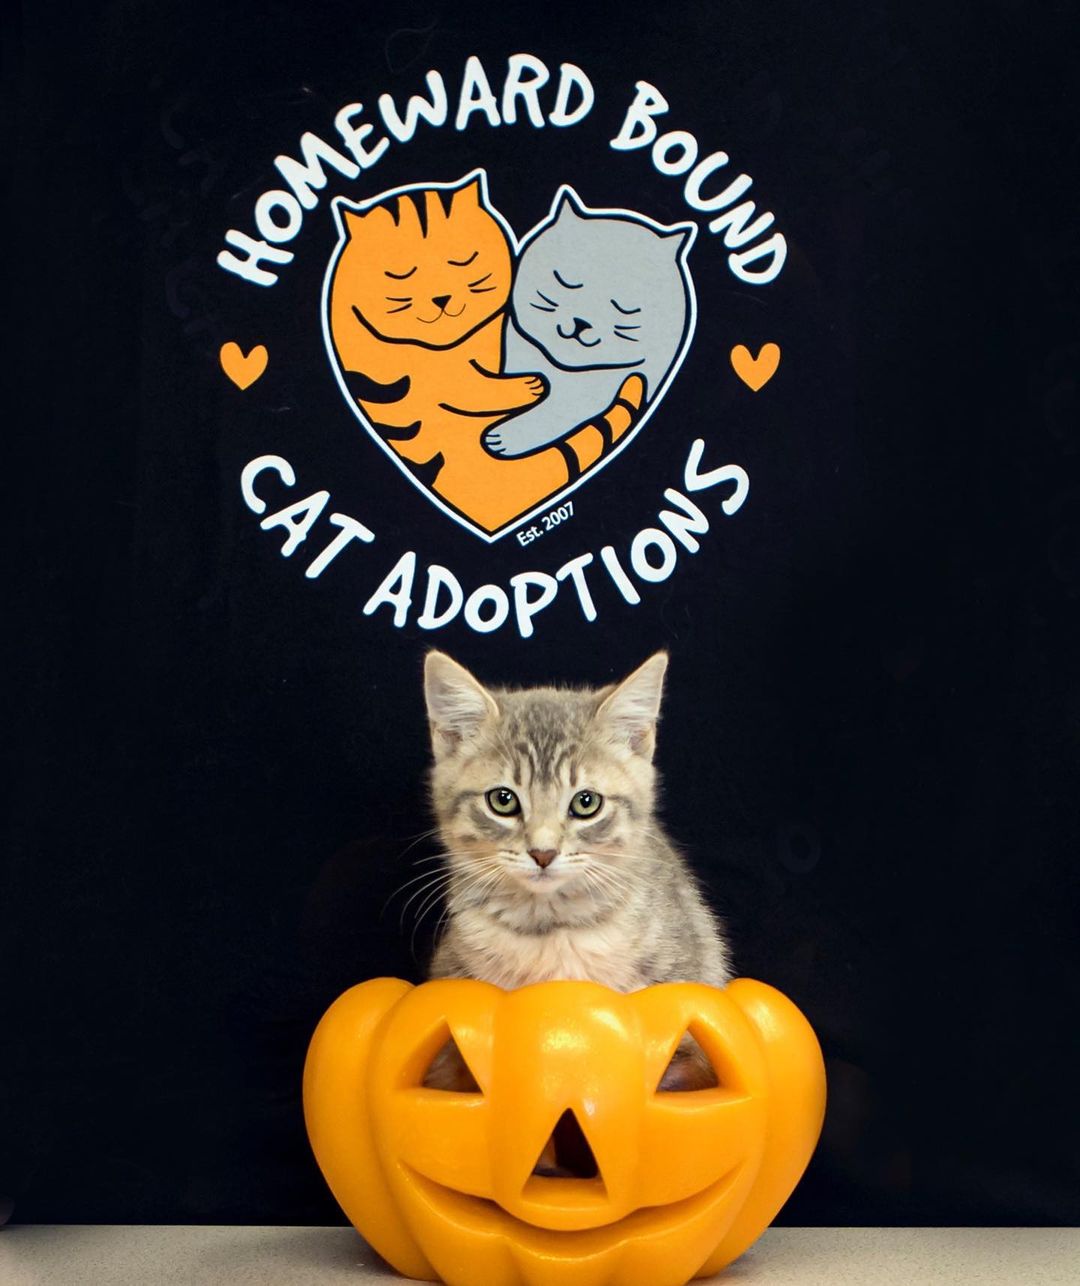 One week until Halloween! It's safe to say our kittens are excited to find homes—will you be adopting? 😺 👻 🎃 😺

<a target='_blank' href='https://www.instagram.com/explore/tags/adopt/'>#adopt</a> <a target='_blank' href='https://www.instagram.com/explore/tags/kittens/'>#kittens</a> <a target='_blank' href='https://www.instagram.com/explore/tags/kittenseason/'>#kittenseason</a> <a target='_blank' href='https://www.instagram.com/explore/tags/catsoflasvegas/'>#catsoflasvegas</a> <a target='_blank' href='https://www.instagram.com/explore/tags/felinefamily/'>#felinefamily</a> <a target='_blank' href='https://www.instagram.com/explore/tags/halloween/'>#halloween</a> <a target='_blank' href='https://www.instagram.com/explore/tags/pumpkins/'>#pumpkins</a>